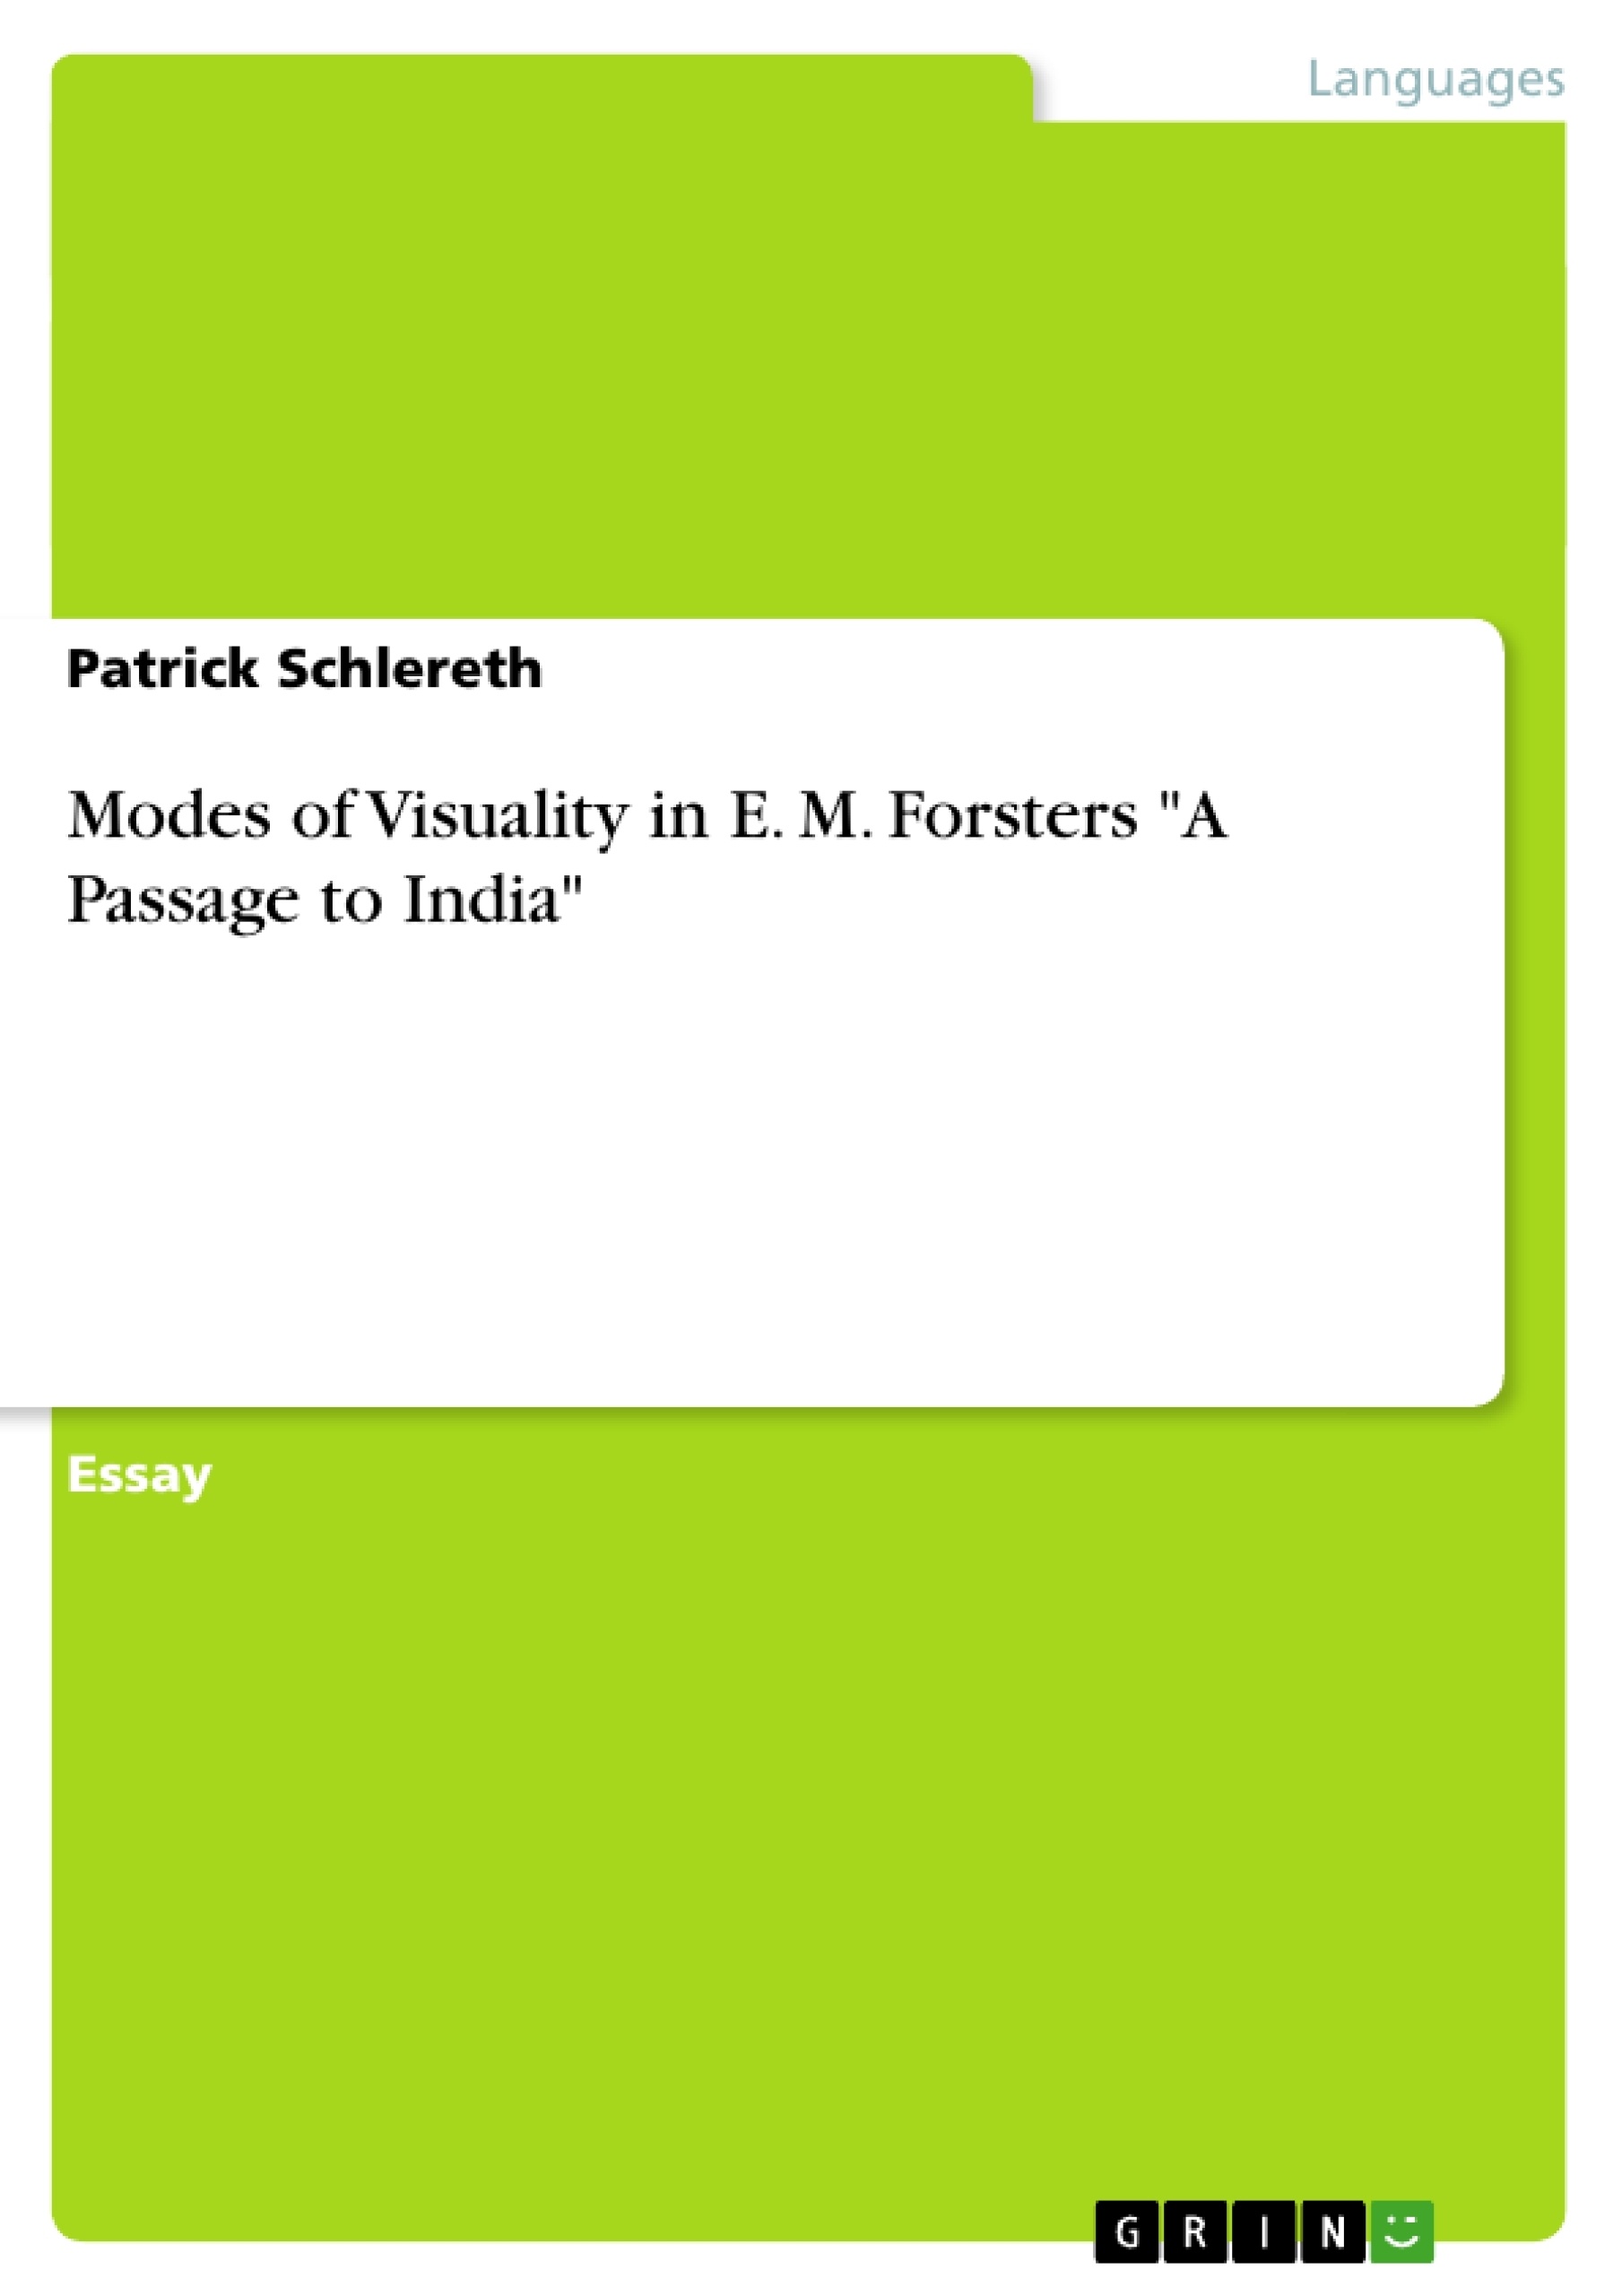 Titre: Modes of Visuality in E. M. Forsters "A Passage to India"